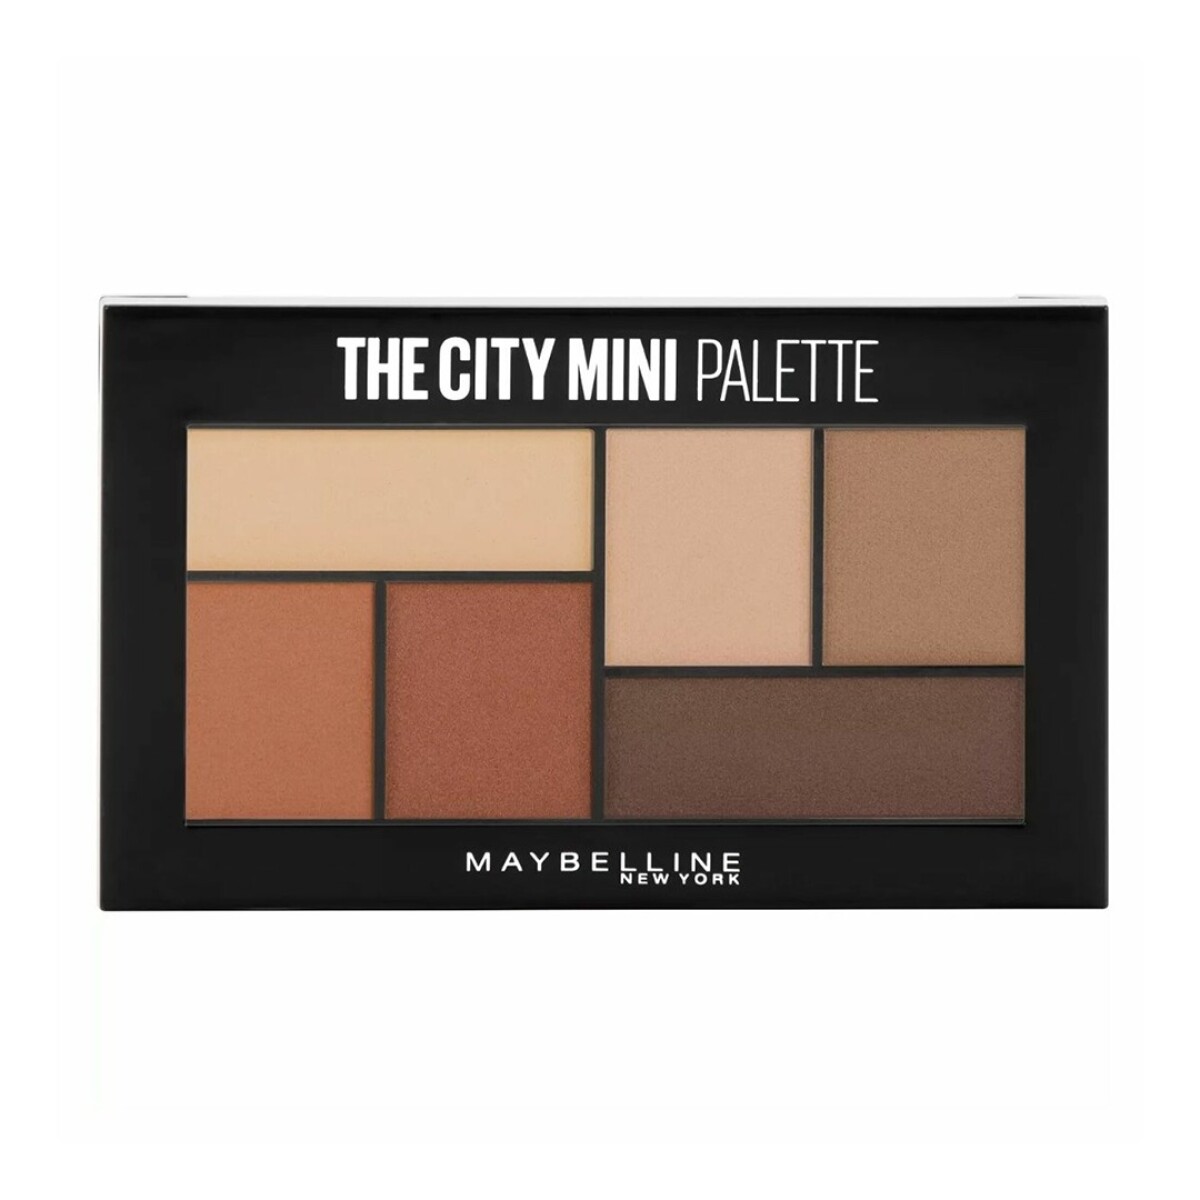 Sombras Maybelline Ny The City Mini Palette - Brooklyn Nudes - 001 